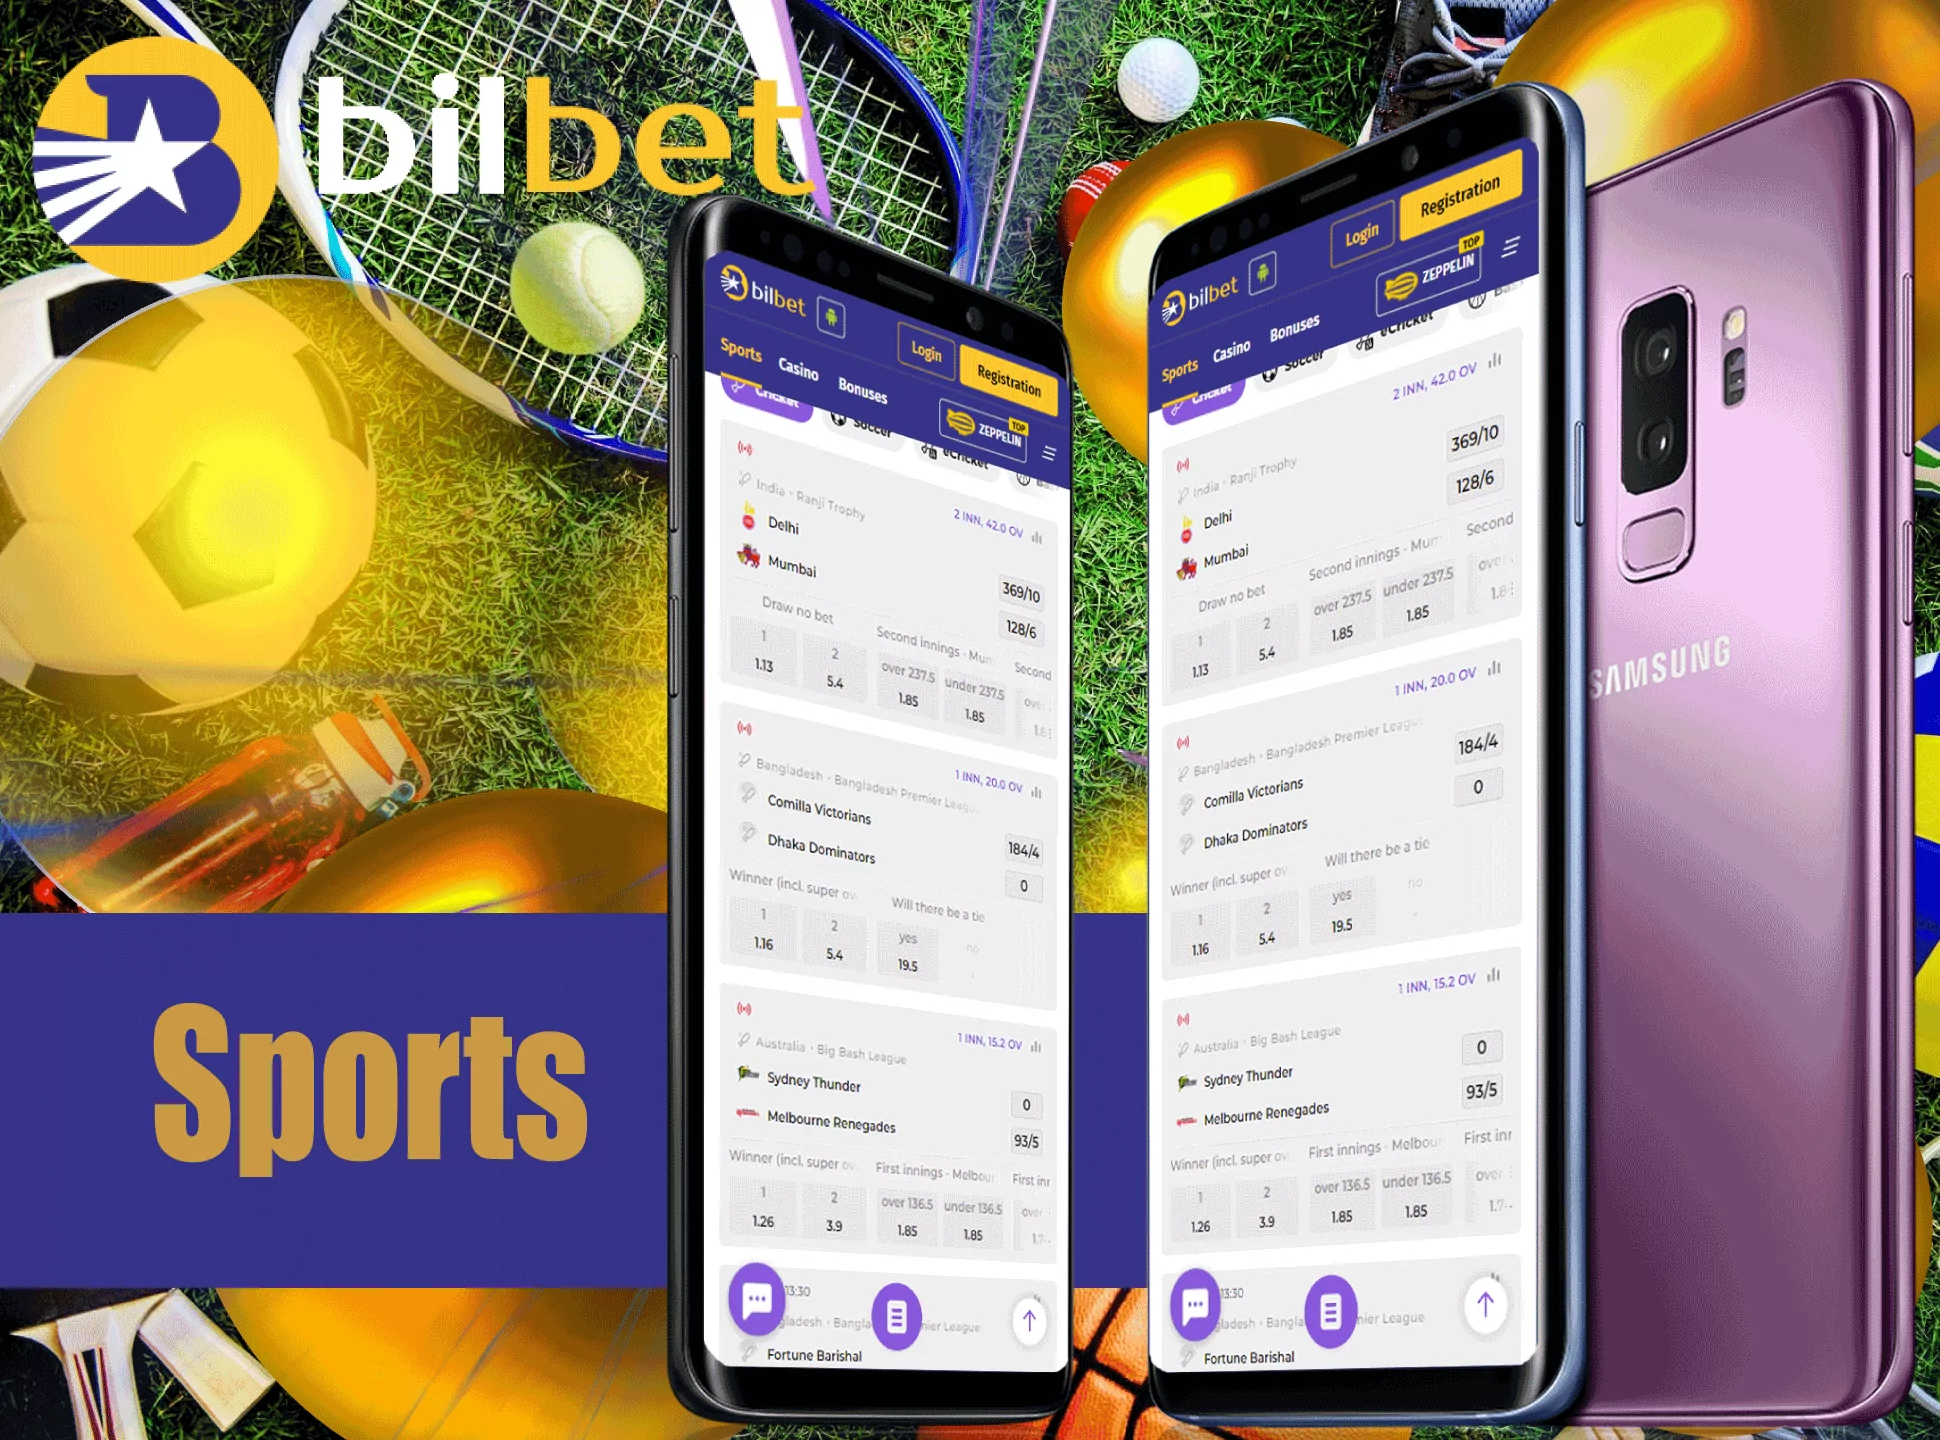 In the Bilbet app you will find many various sports disciplines to bet on.